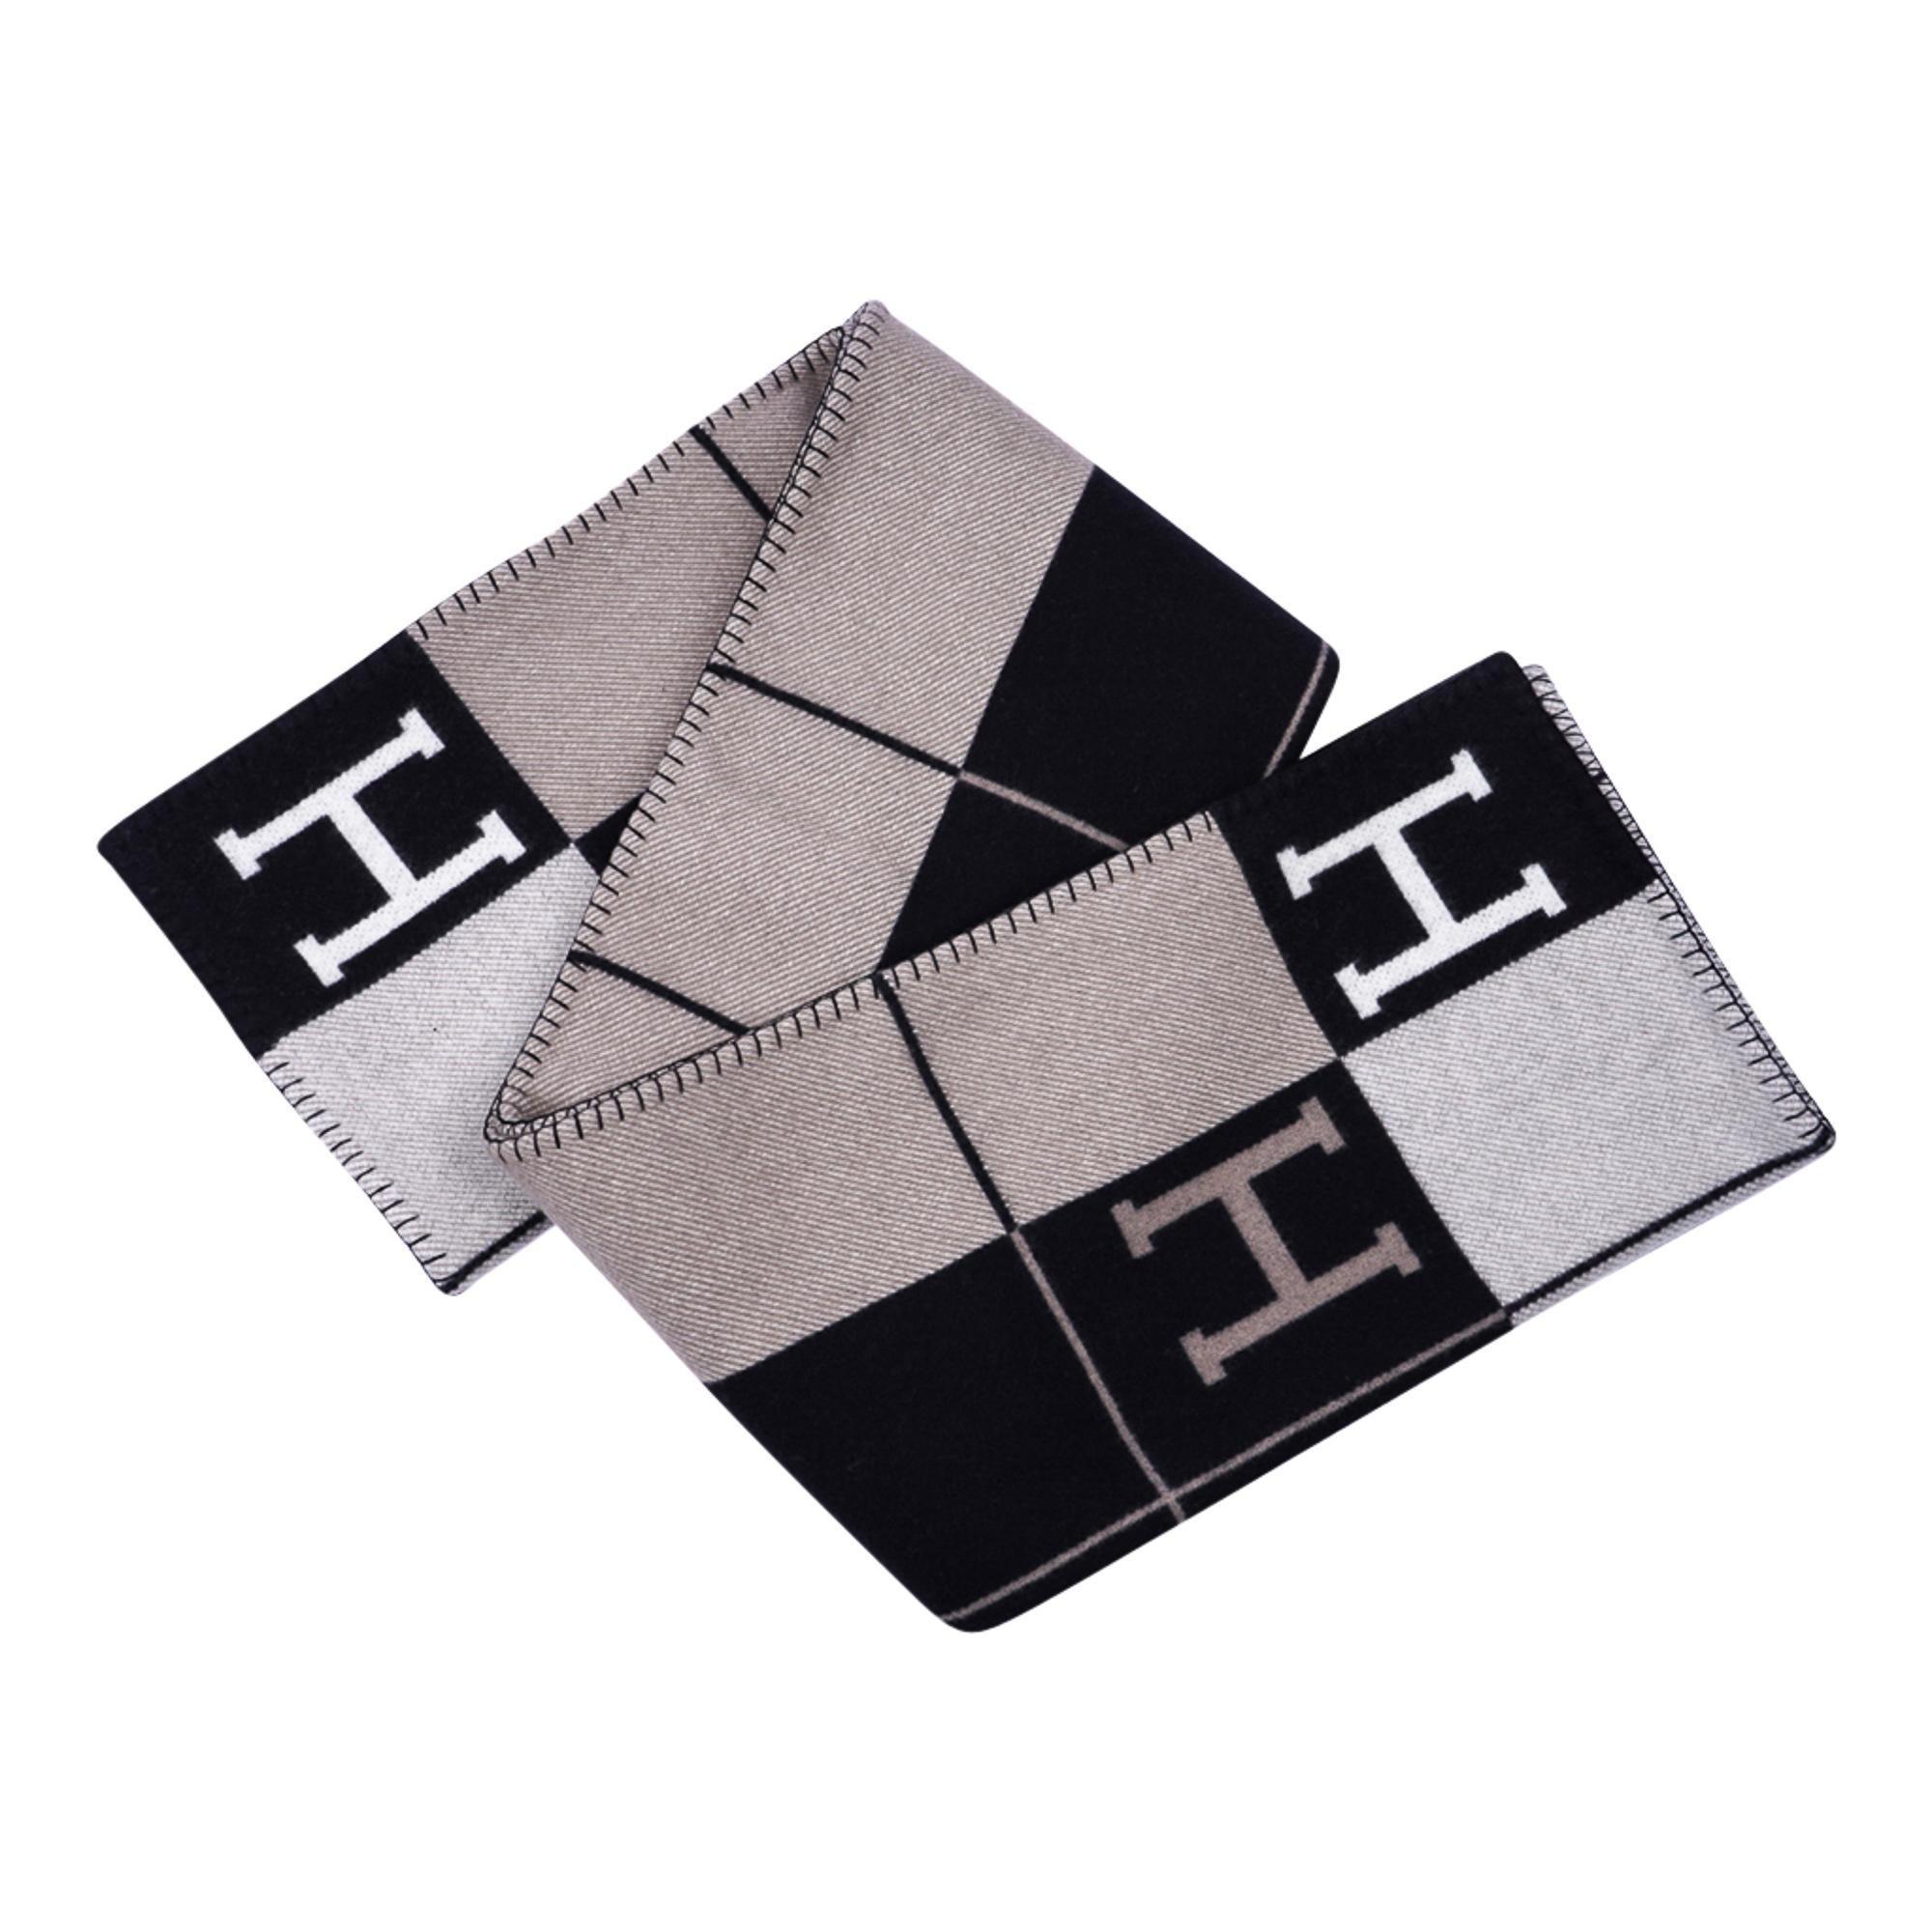 Mightychic offers an Hermes classic Avalon III signature H blanket featured in rare Black, Camel and Ecru.
Created from 90% Merino Wool and 10% cashmere and has whip stitch edges.
New or Pristine Store Fresh Condition. 
Unparalleled for 21 years in